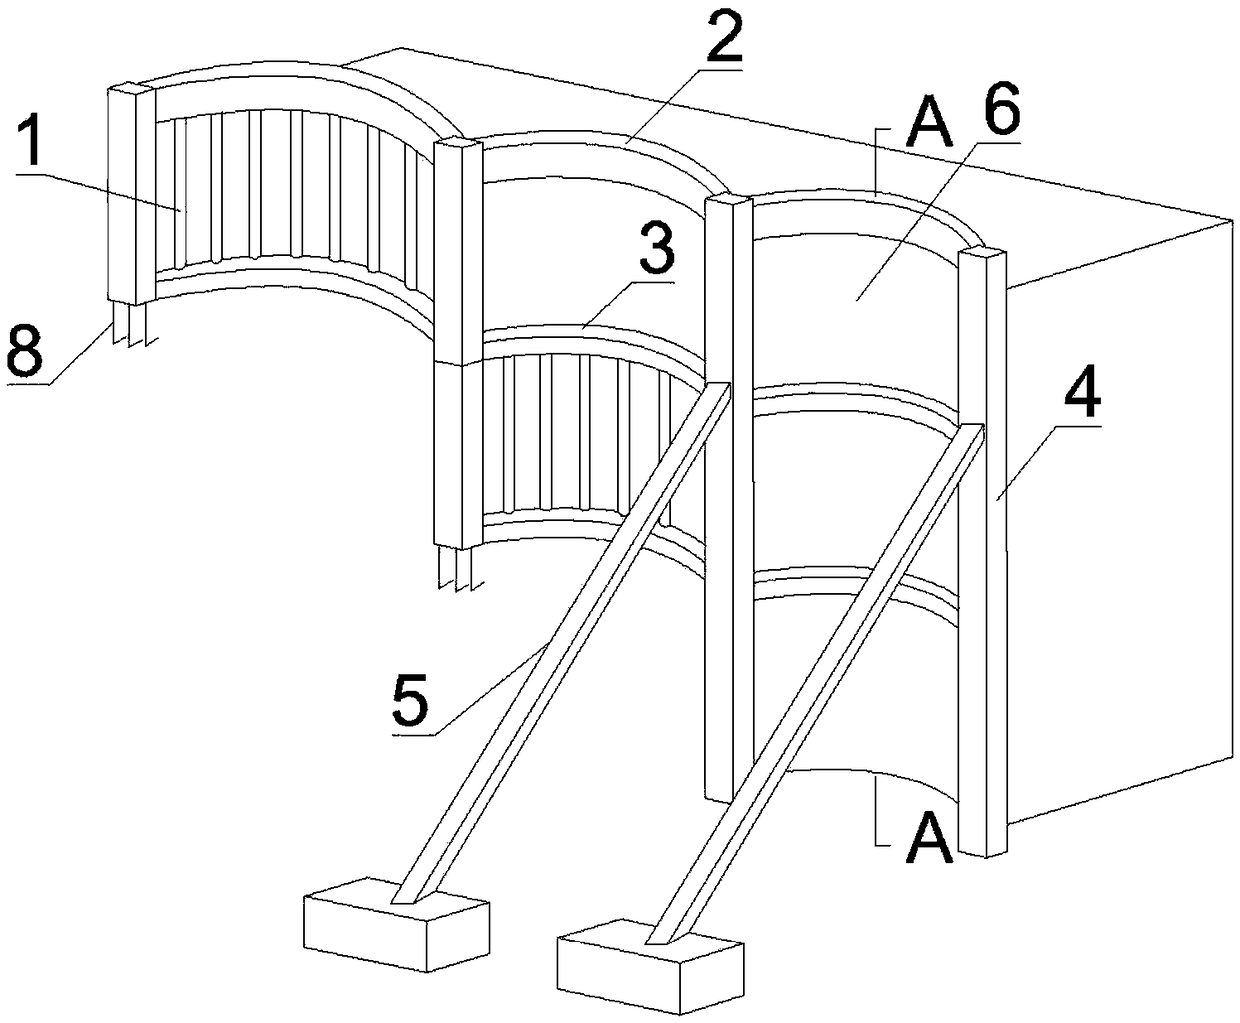 Horizontal-type supporting method for foundation pit of arch shell